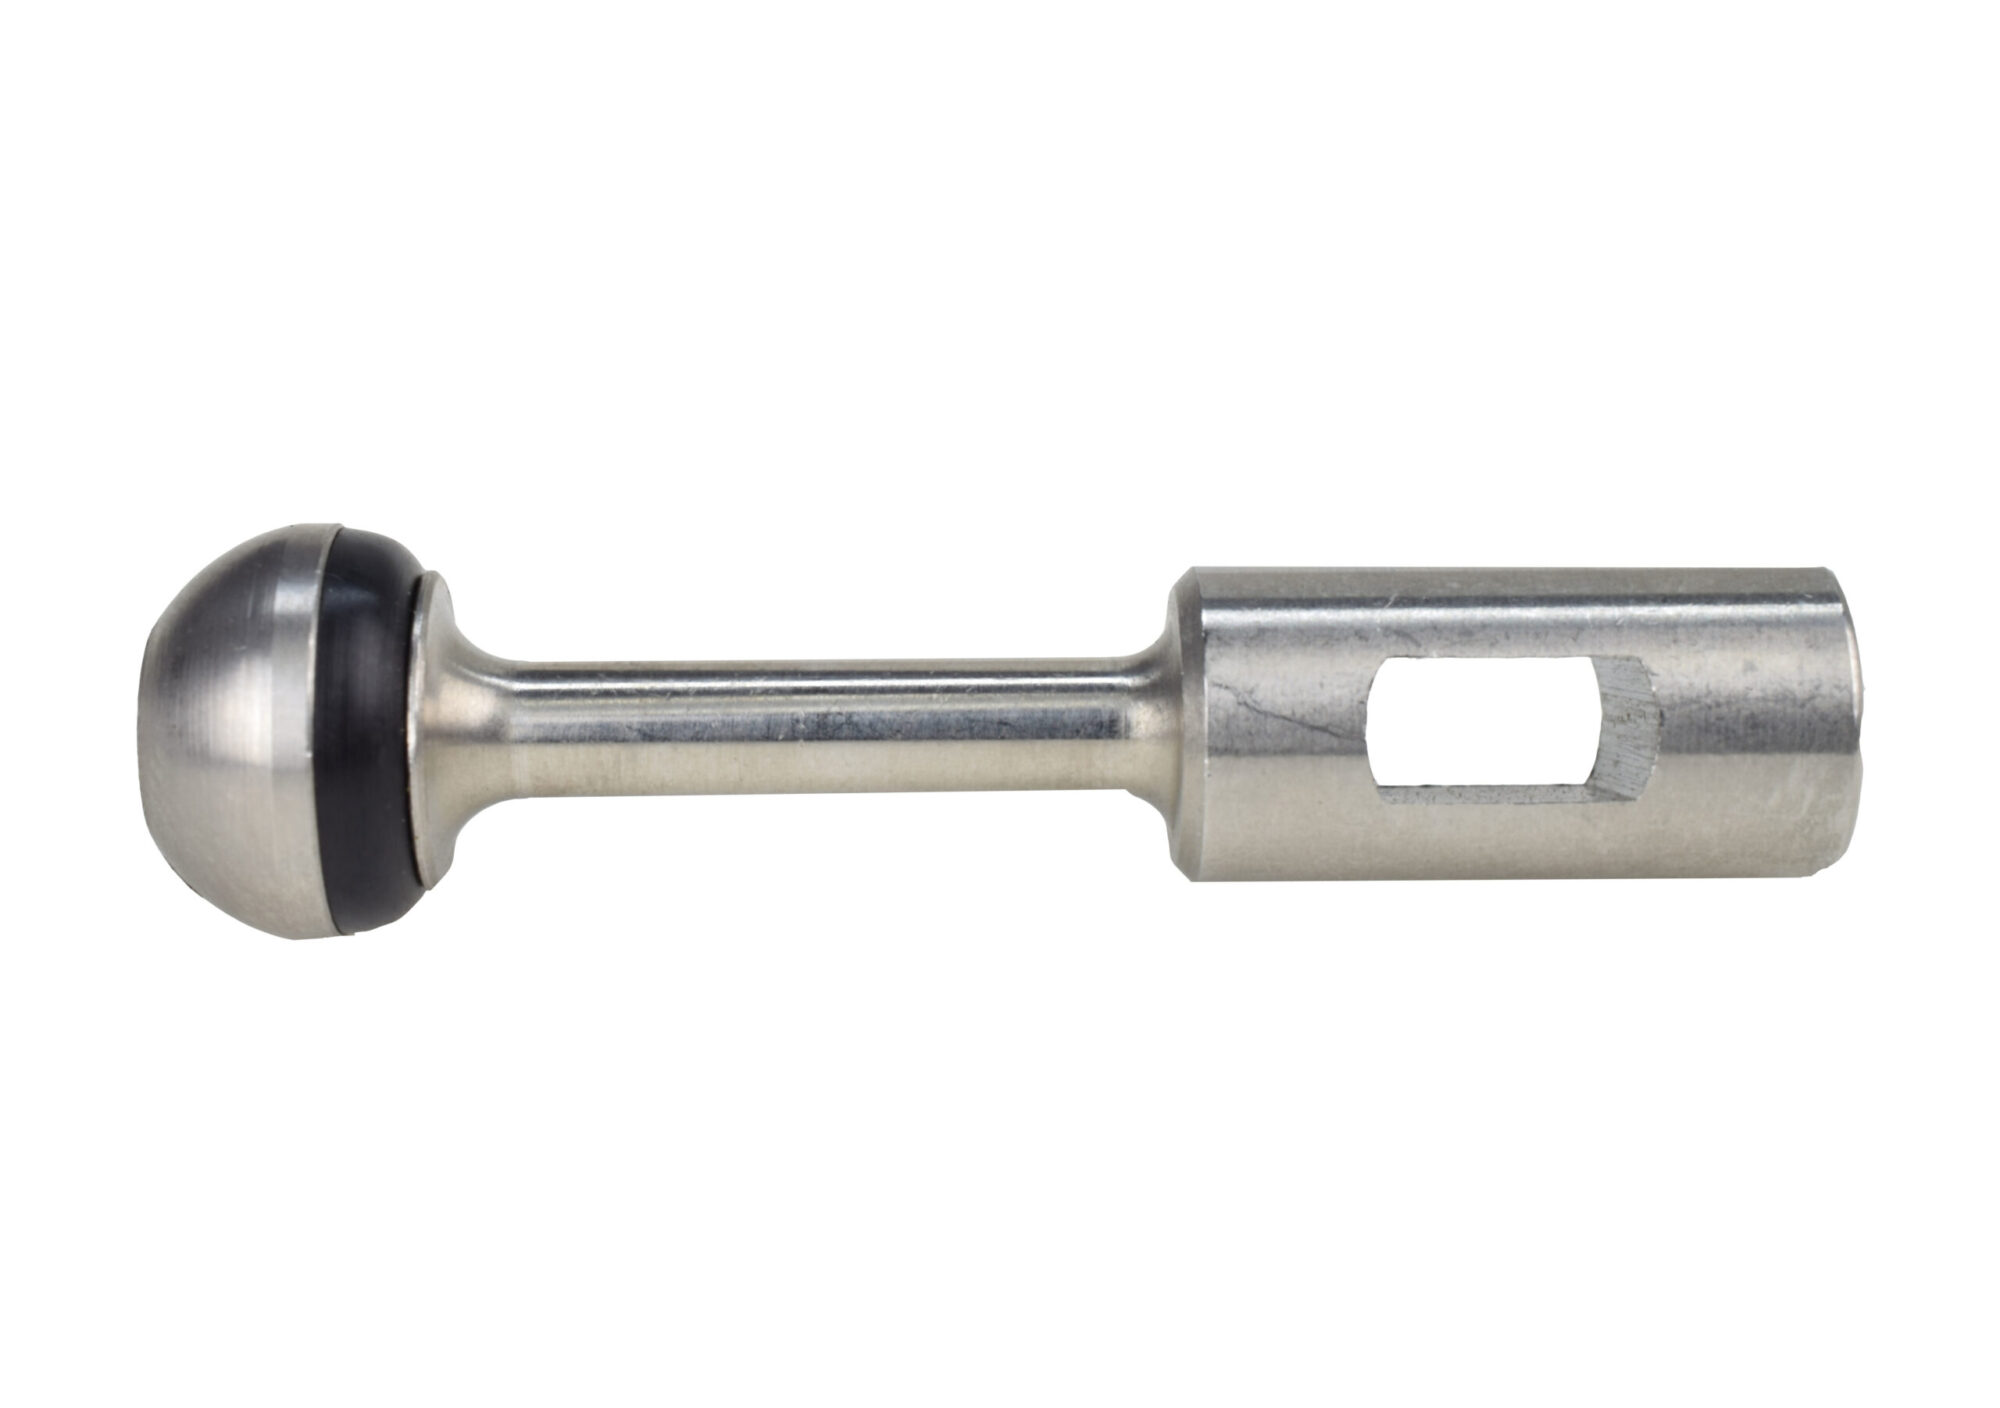 1322SA Stainless Steel Shaft - Complete with 1324 Washer and 1326S Nut